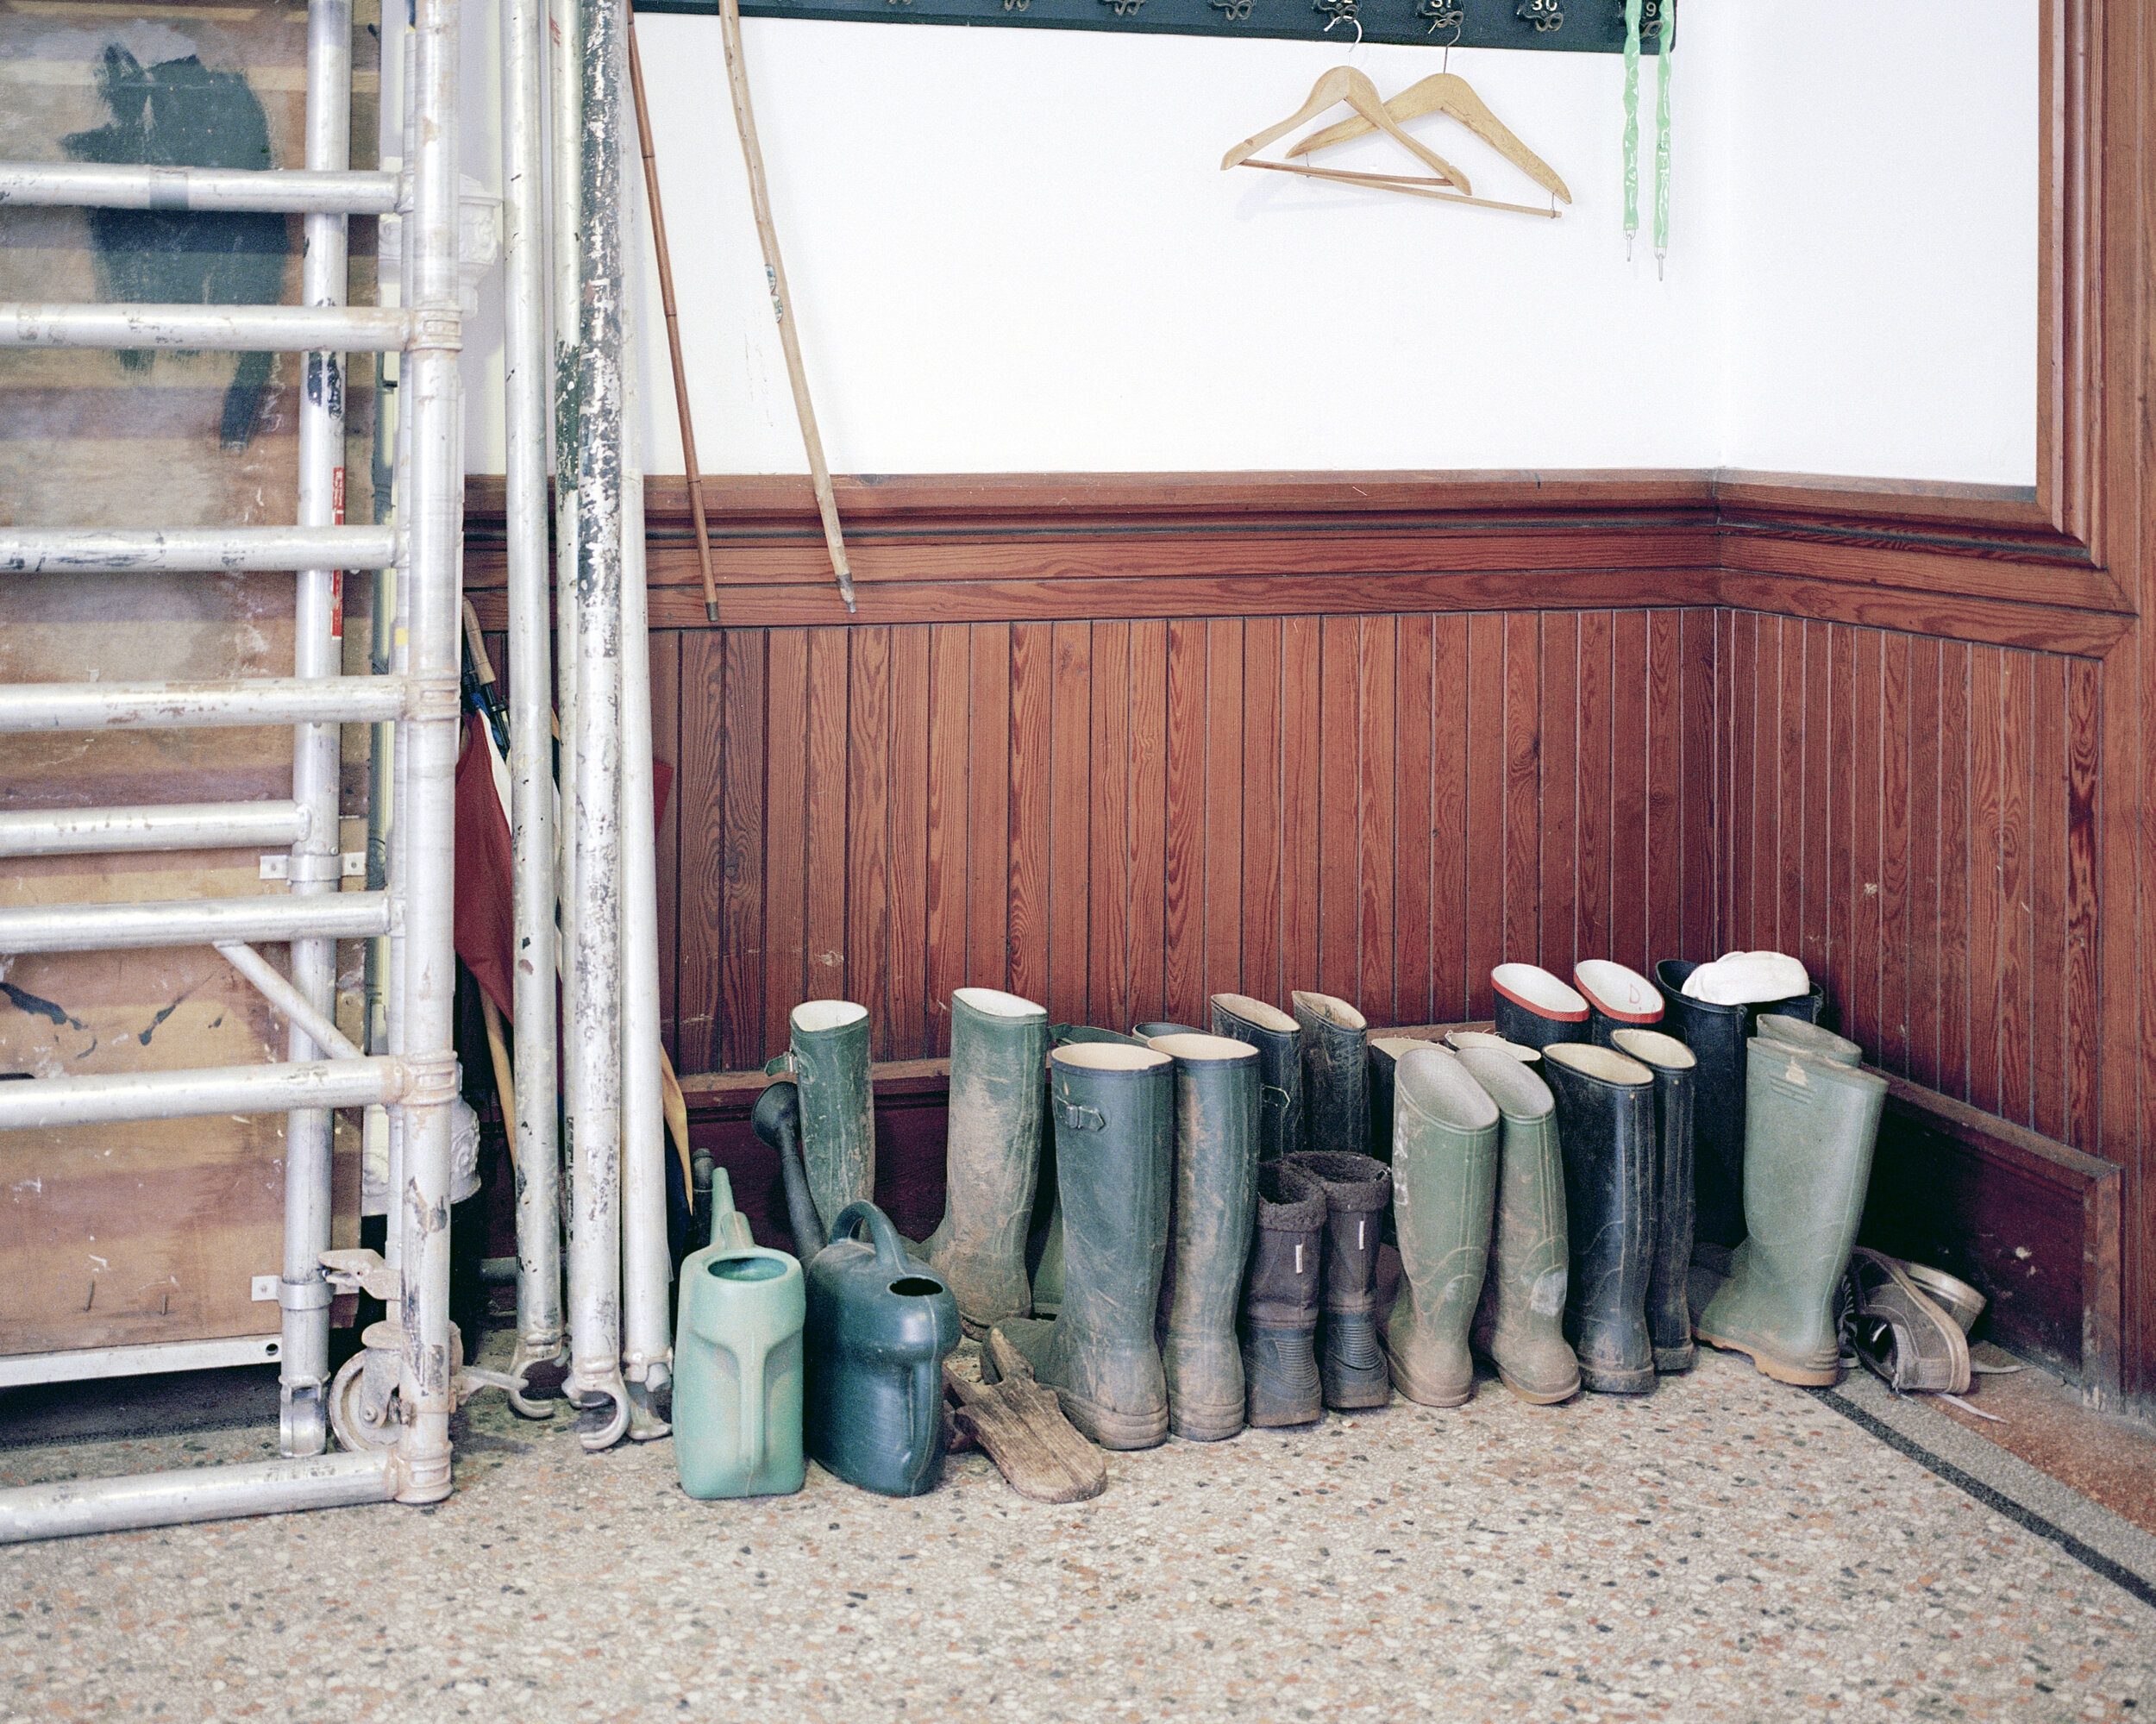   Personal  / Benedict’s House  Wellington Boots, Downside Abbey   